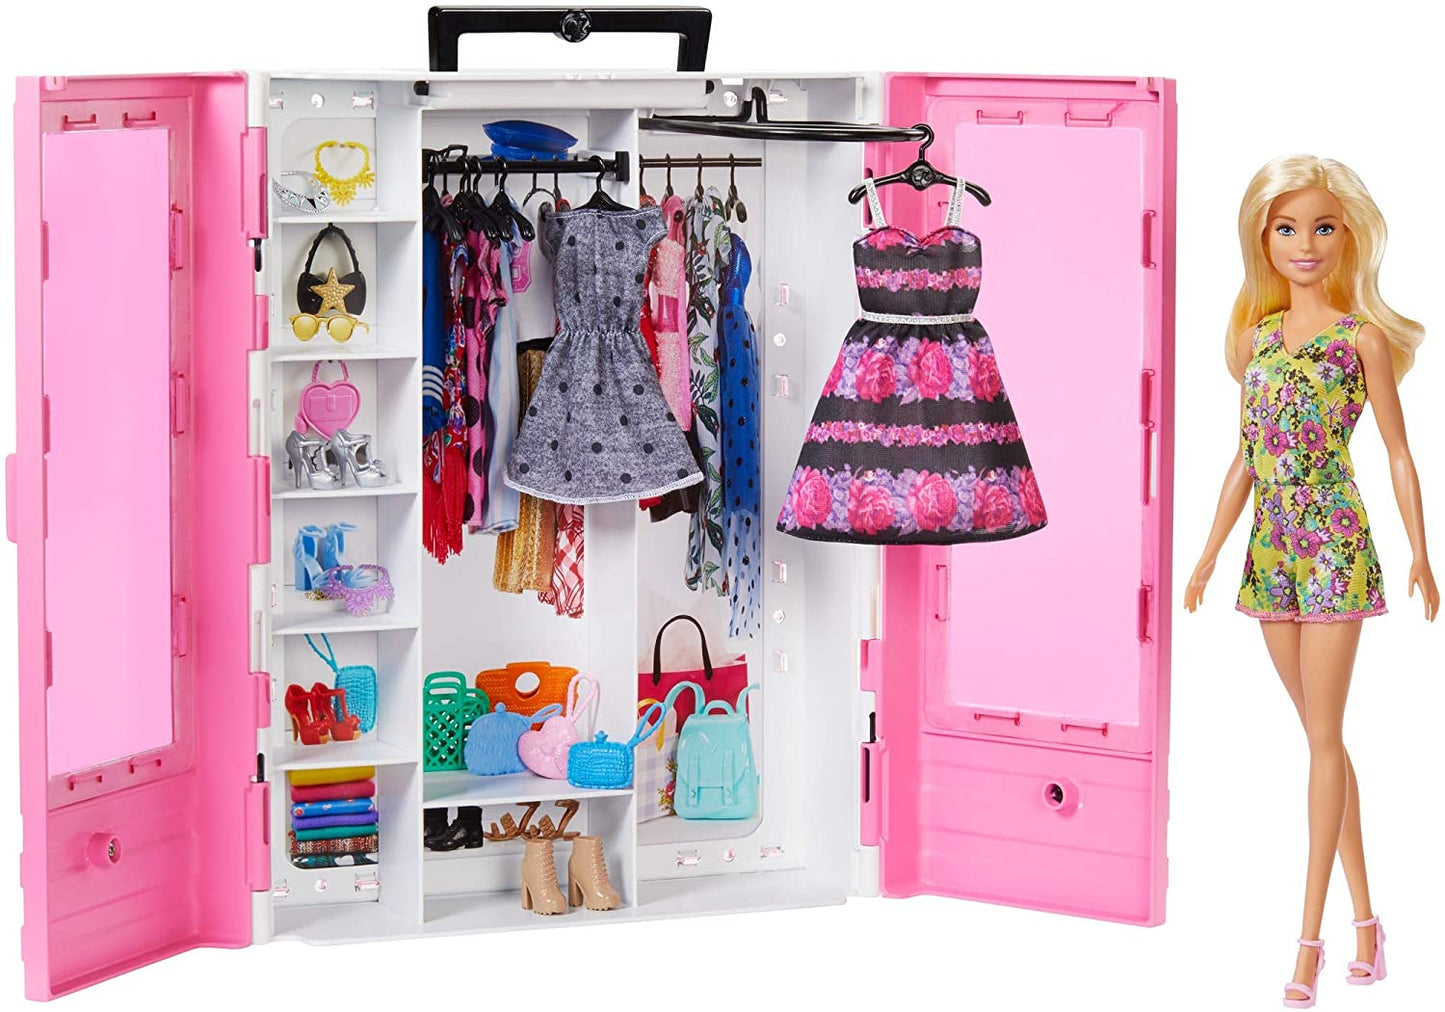 Barbie Fashionistas Ultimate Closet Portable Fashion Toy with Doll, Clothing, Accessories and Hangars